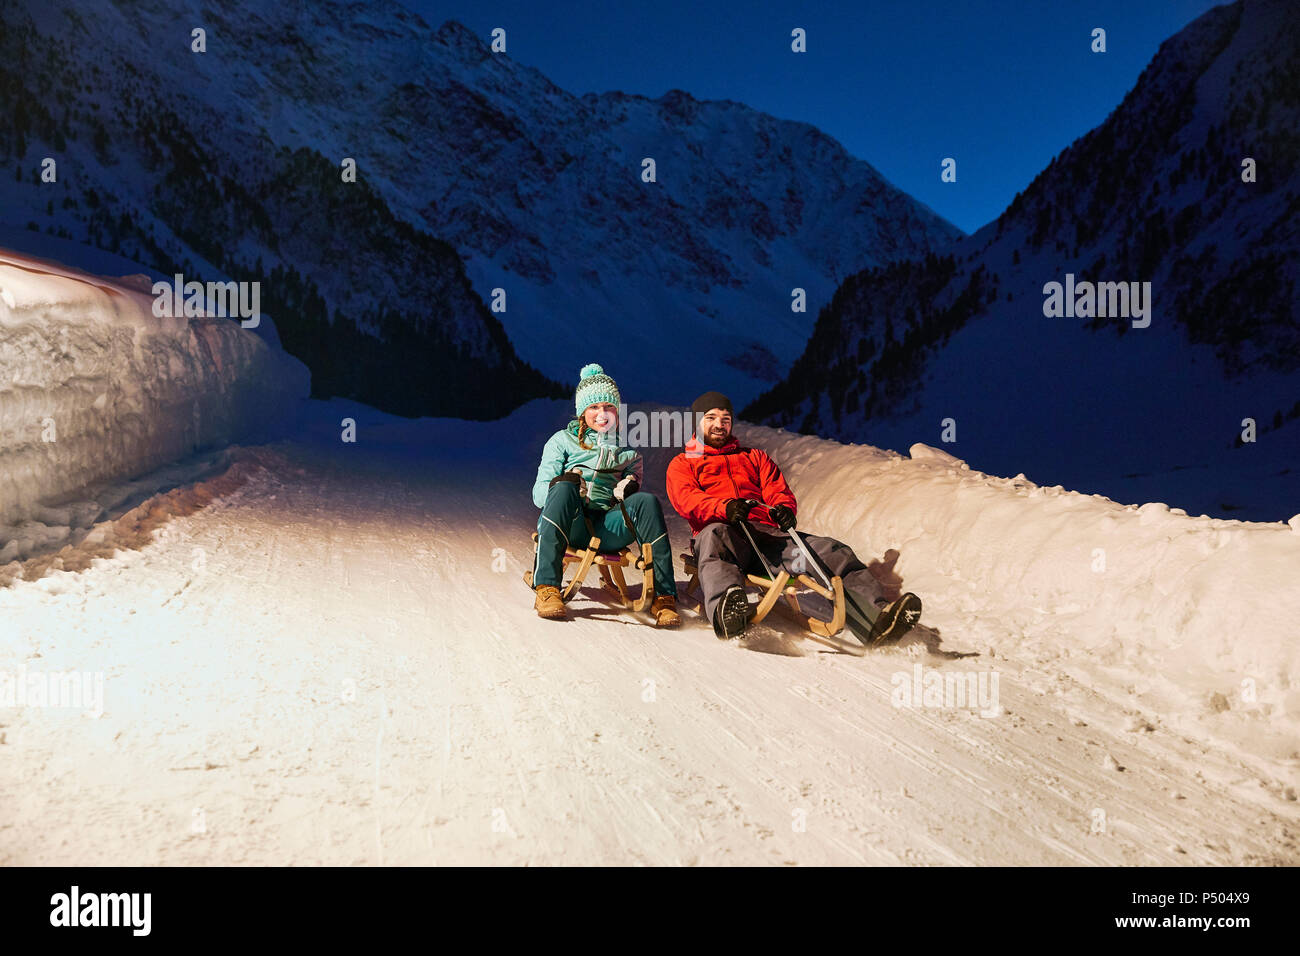 Couple sledding in snow-covered landscape at night Stock Photo